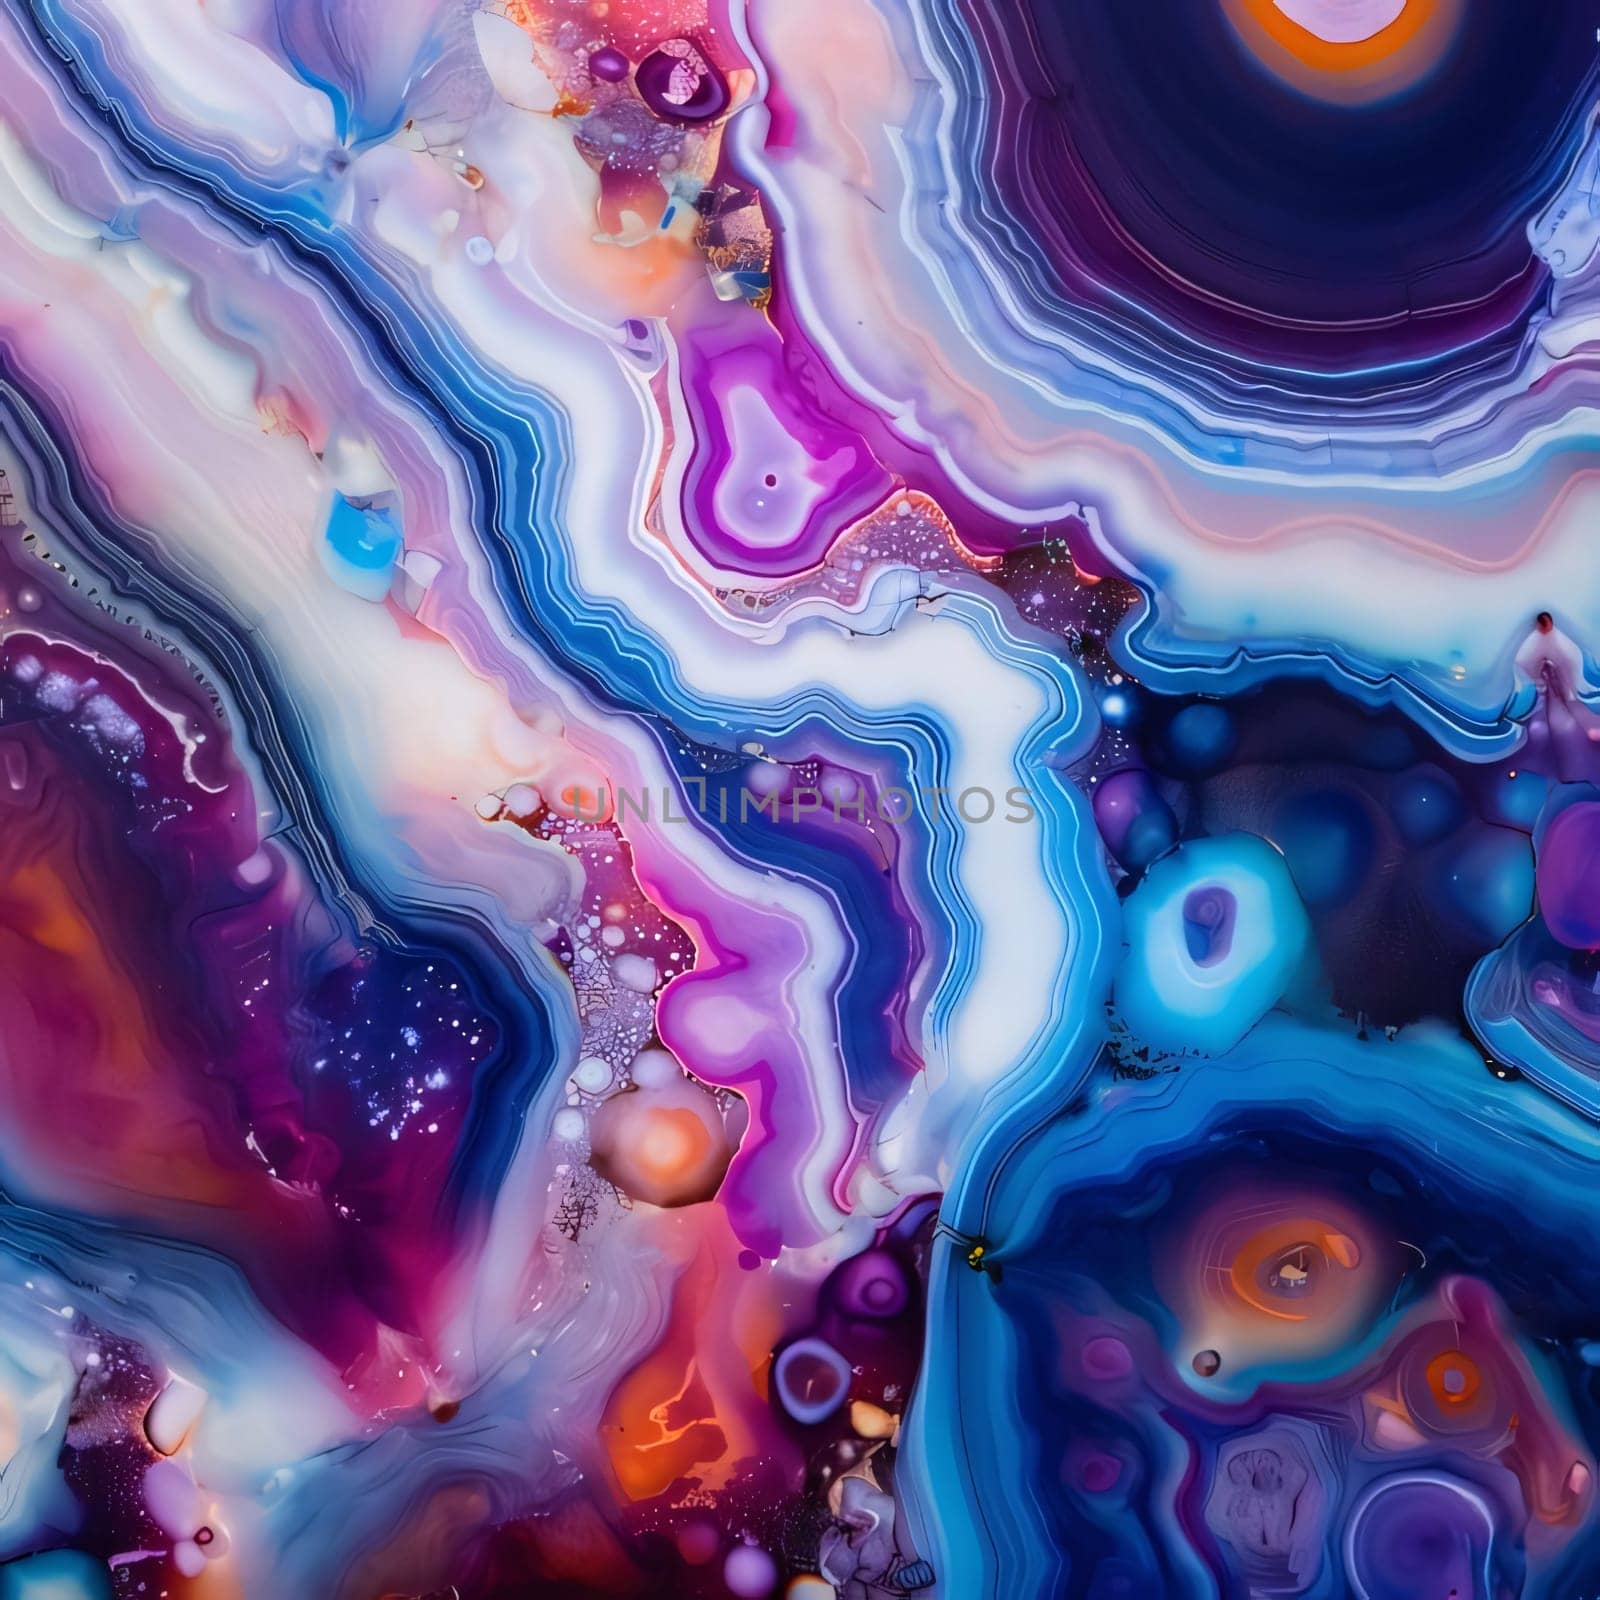 Abstract background design: abstract background with blue, purple and orange swirls and circles